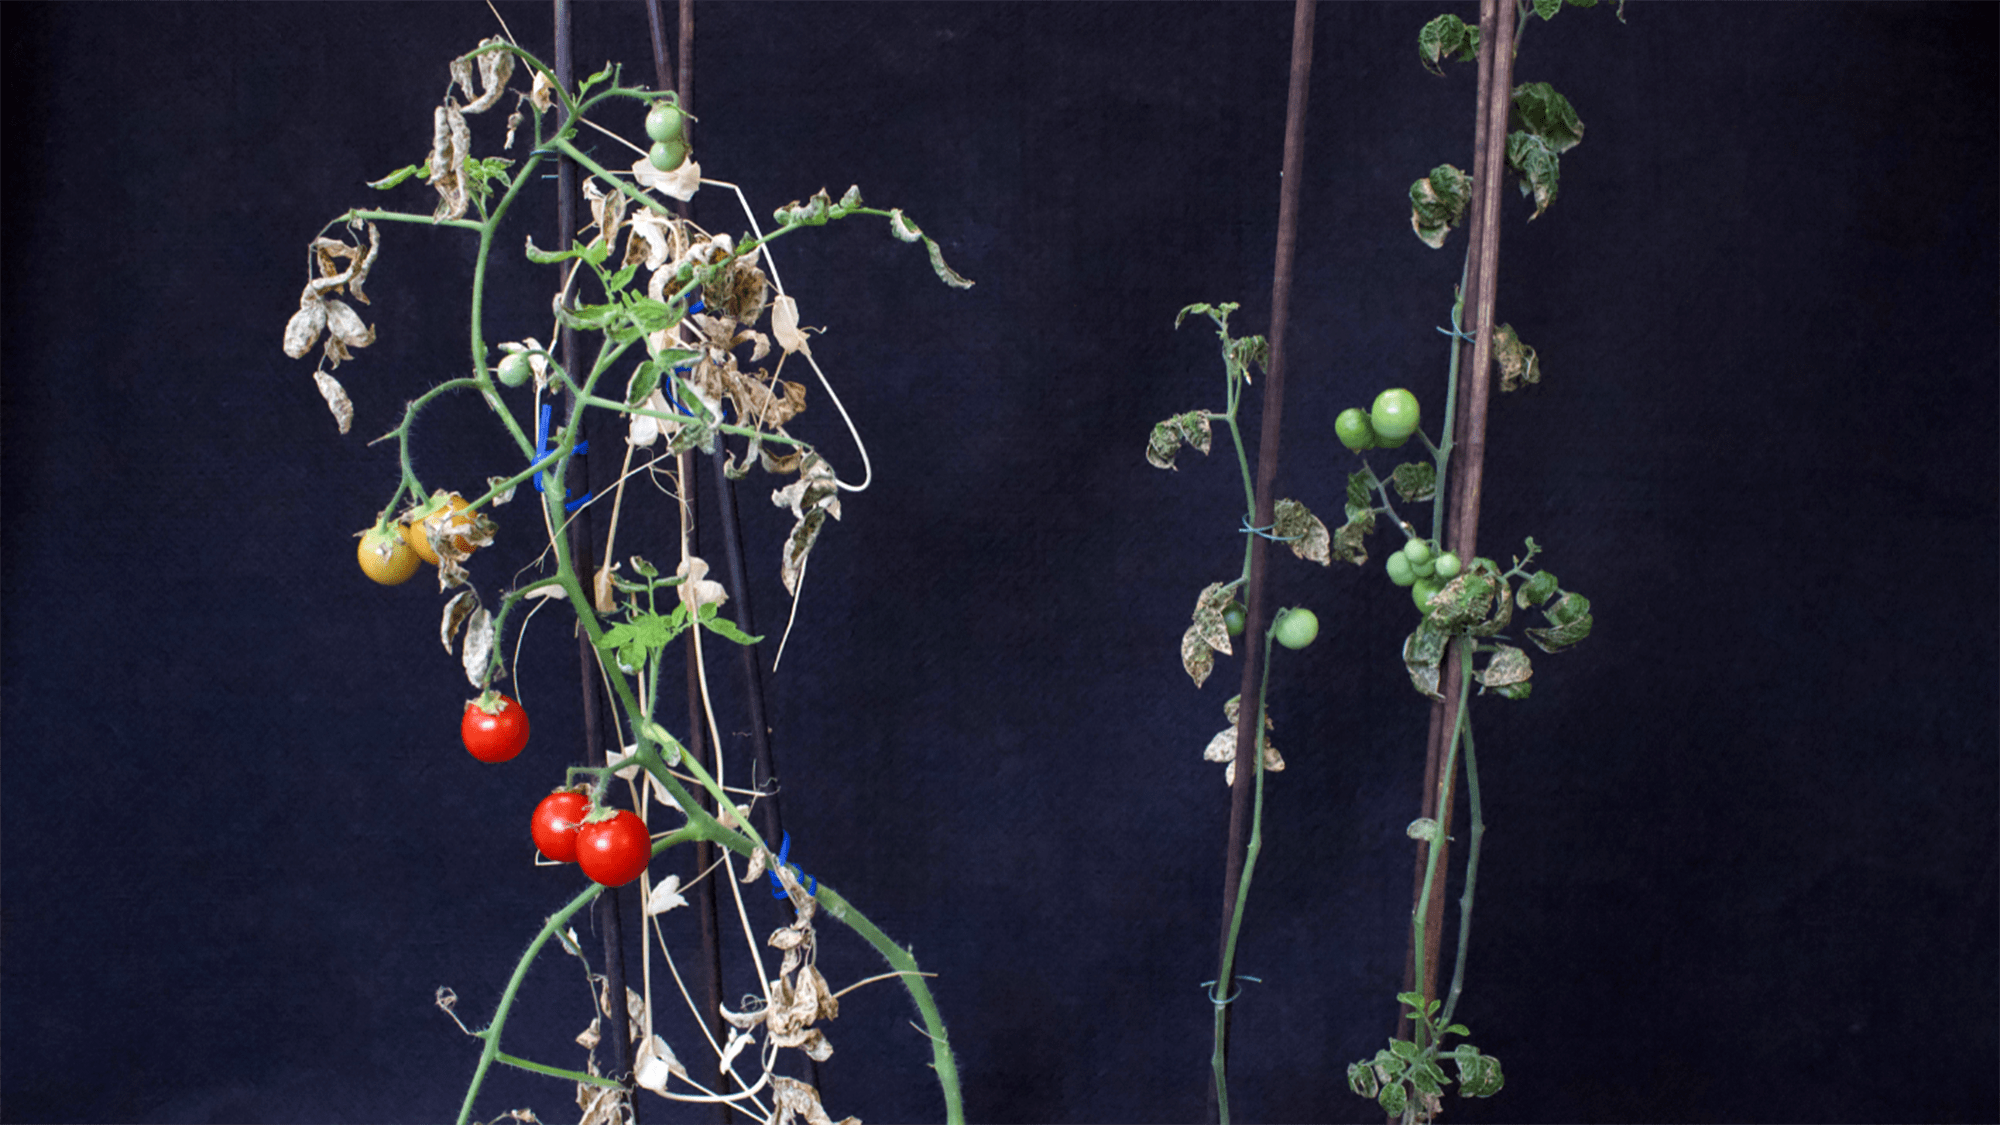 Intercropped tomato (left) compared to monocropped tomatoes (right). Both were planted on the same day, but here we can see that the intercropped tomato plant is larger, bears more fruit, and the tomatoes ripened earlier than its monocropped counterpart.